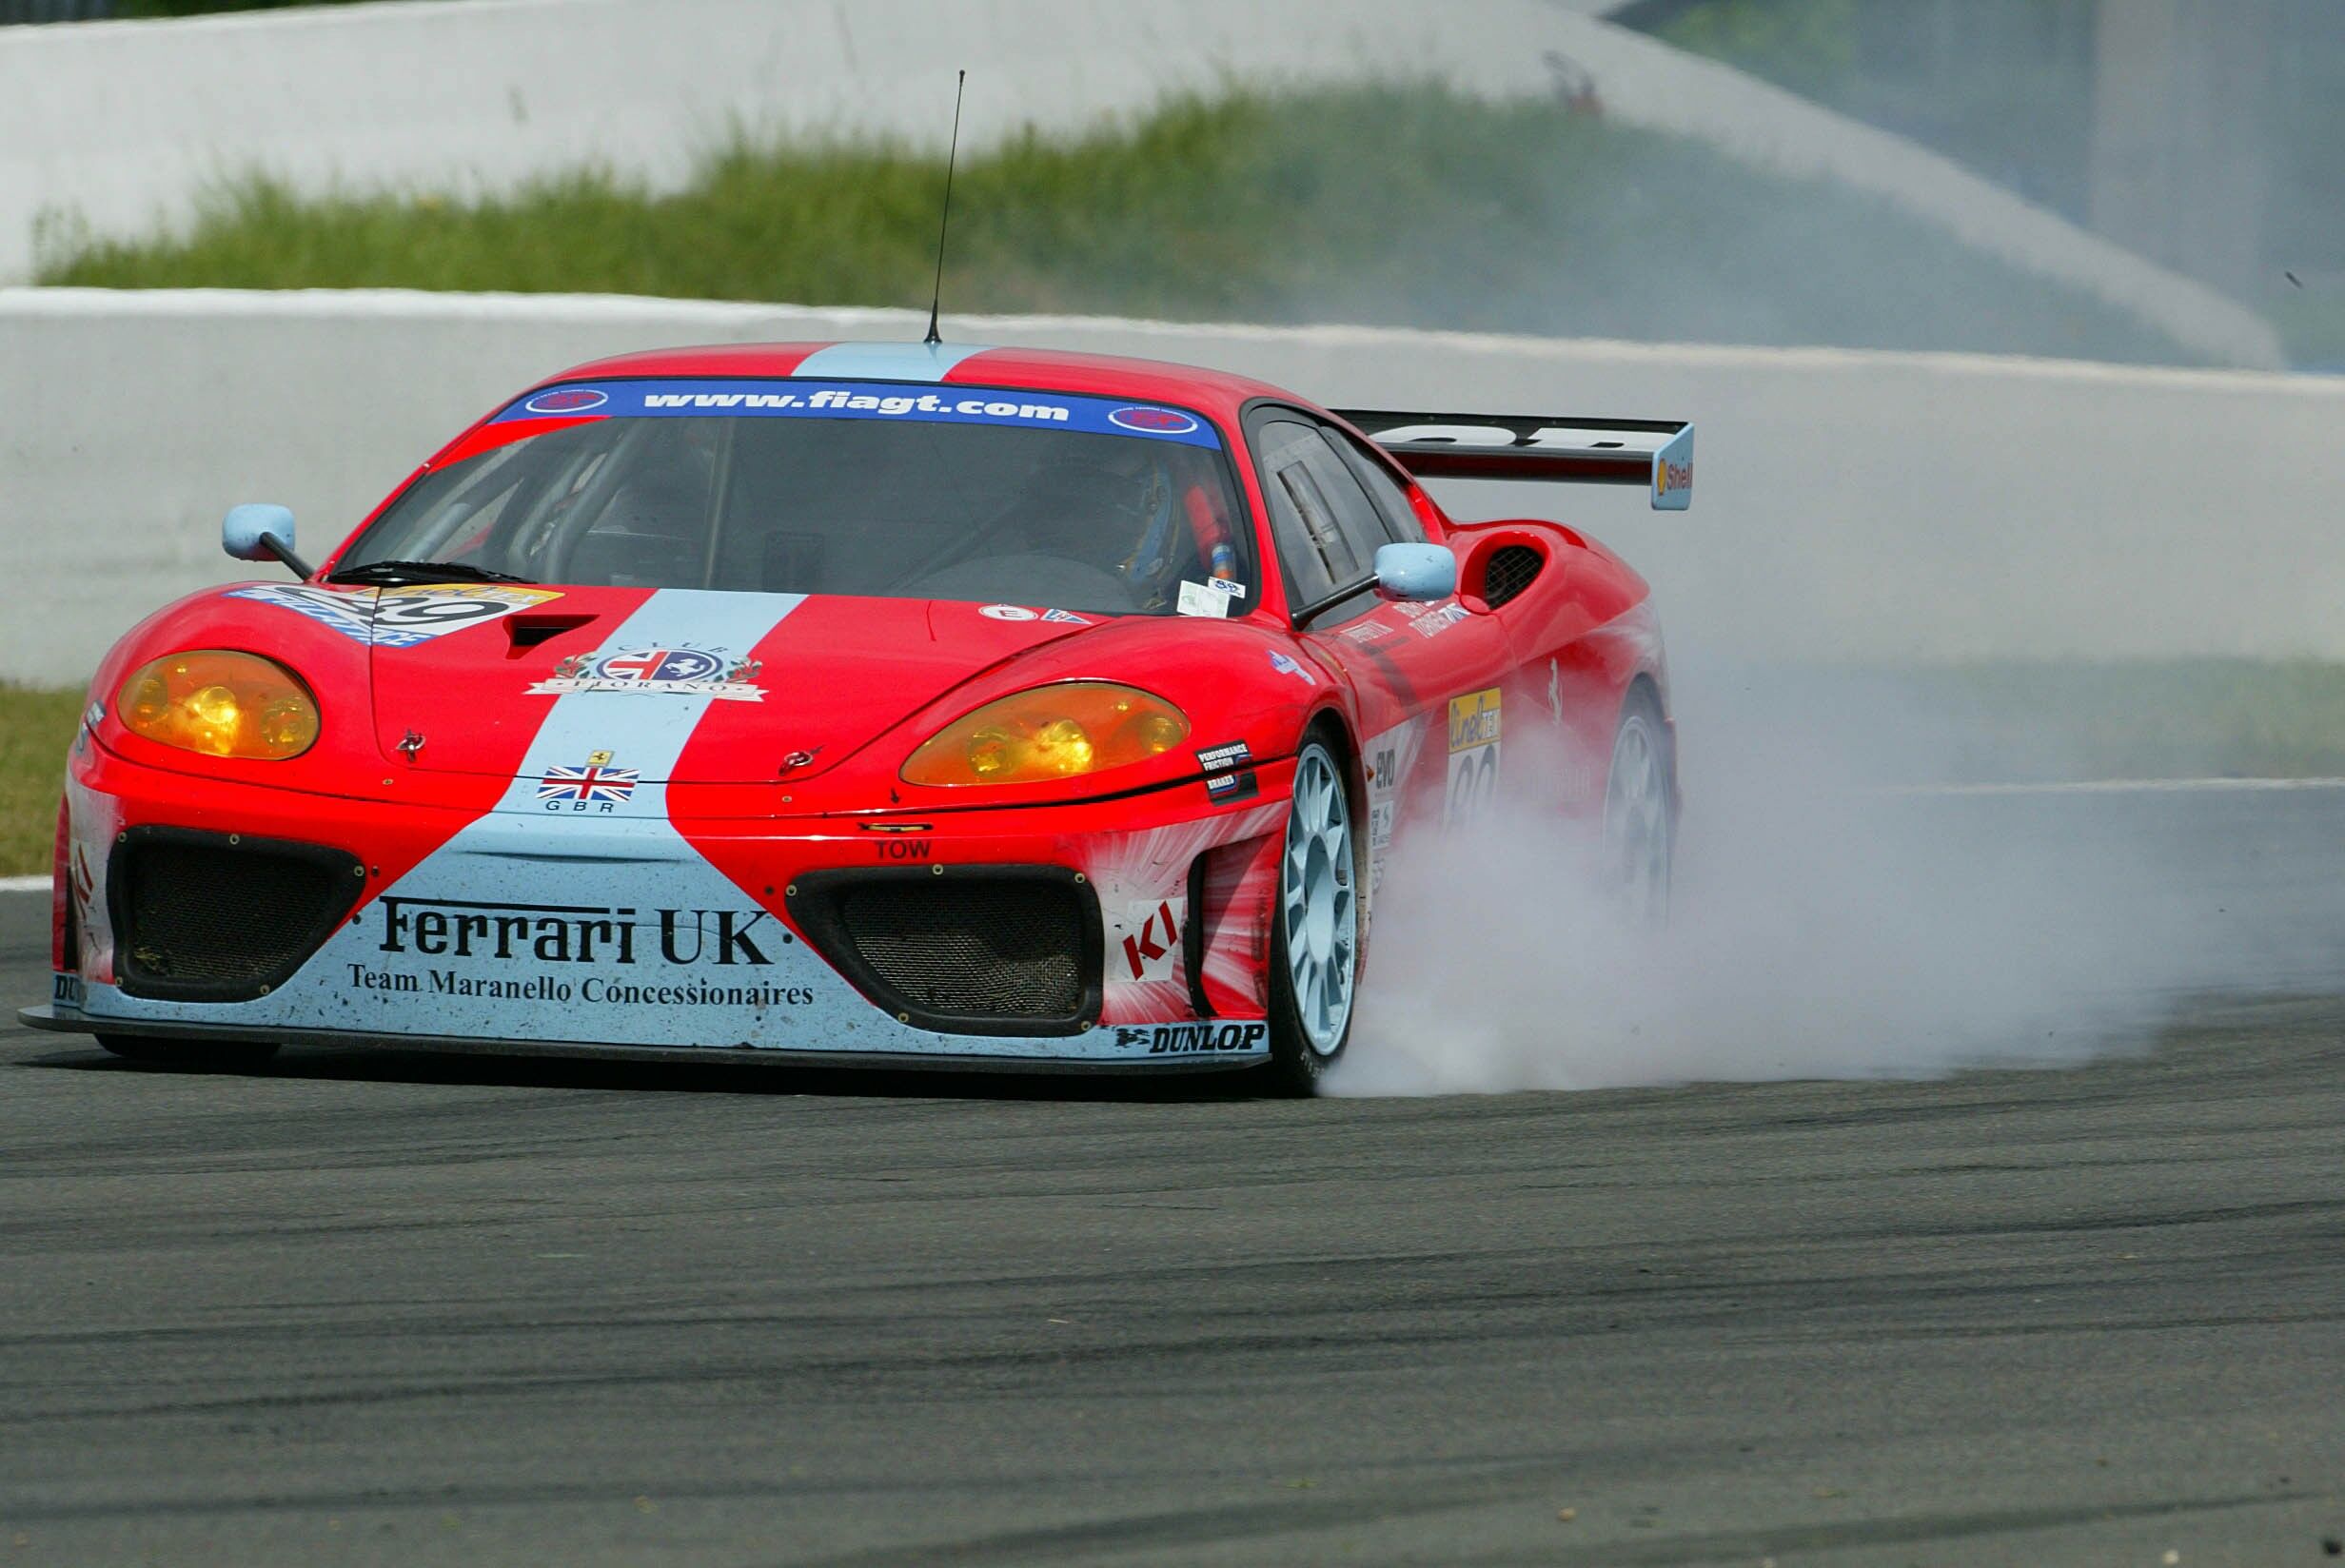 the no 89 Team Maranello Concessionaires Ferrari 360 Modena on its way to victory in N-GT at Magny-Cours yesterday before being excluded after the race for a technical infrigement